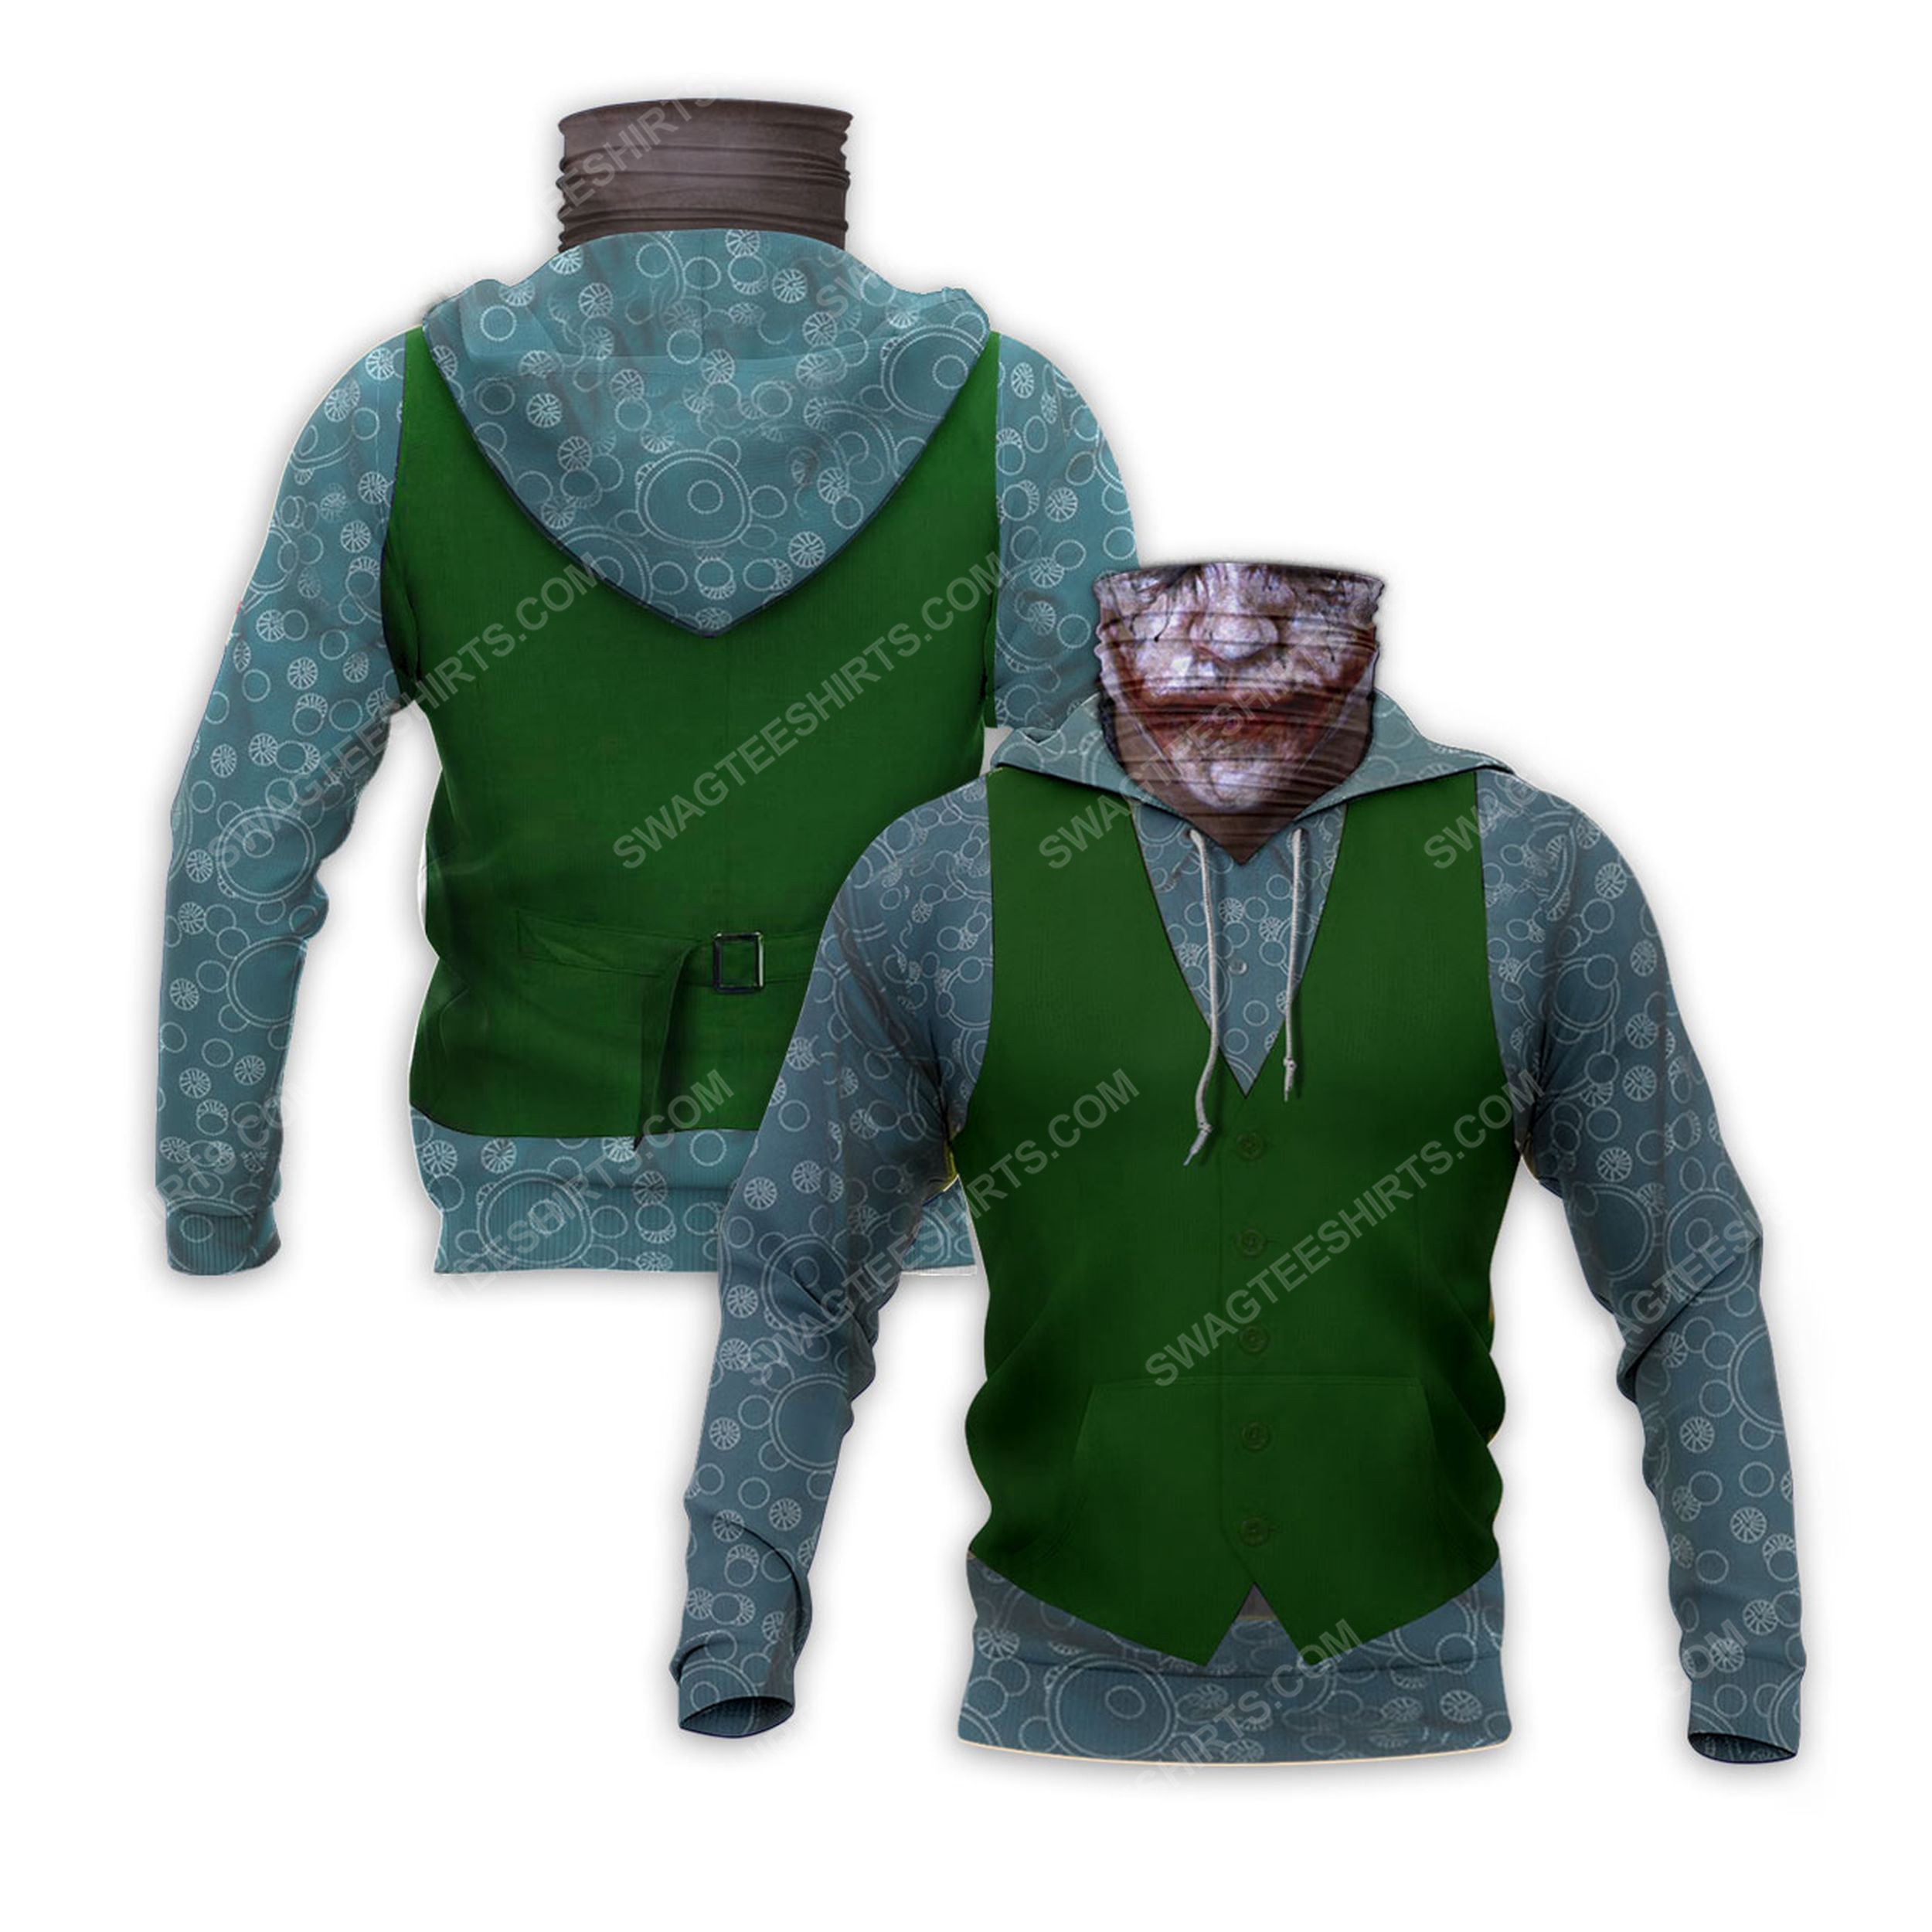 [special edition] The joker with suit full print mask hoodie – maria